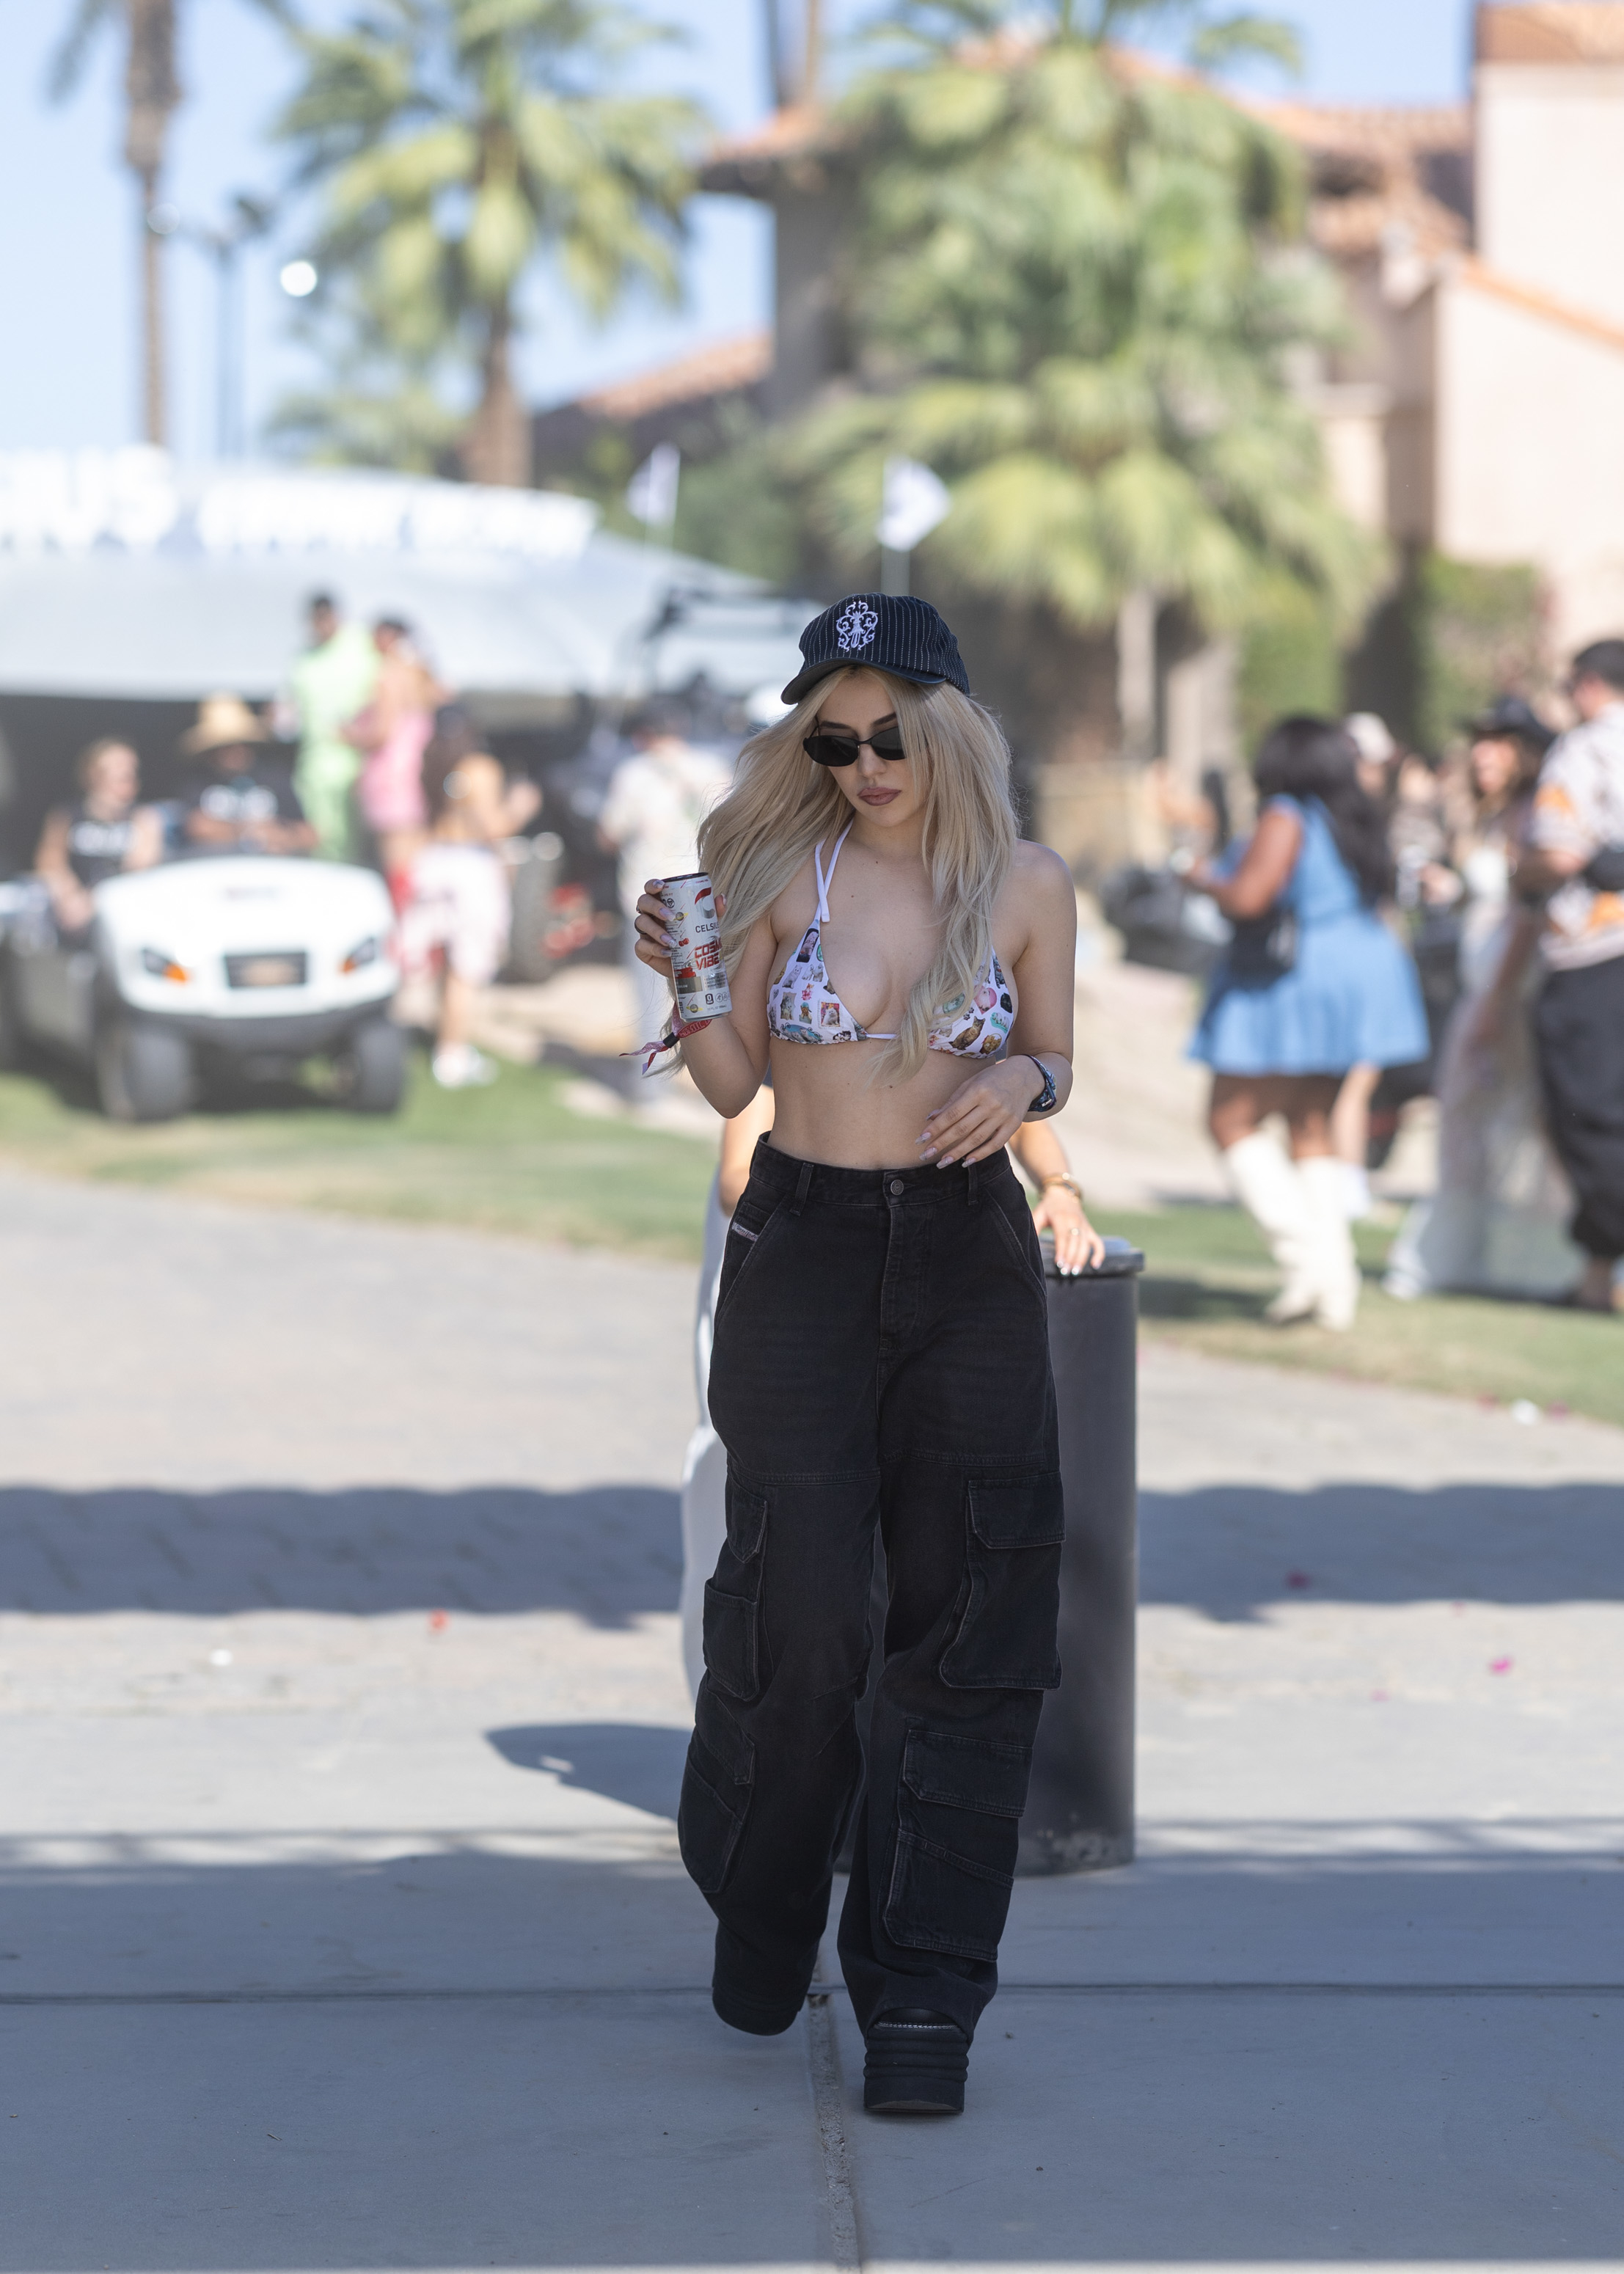 Person in a beanie and high-waisted pants holding a drink and phone, walking outdoors